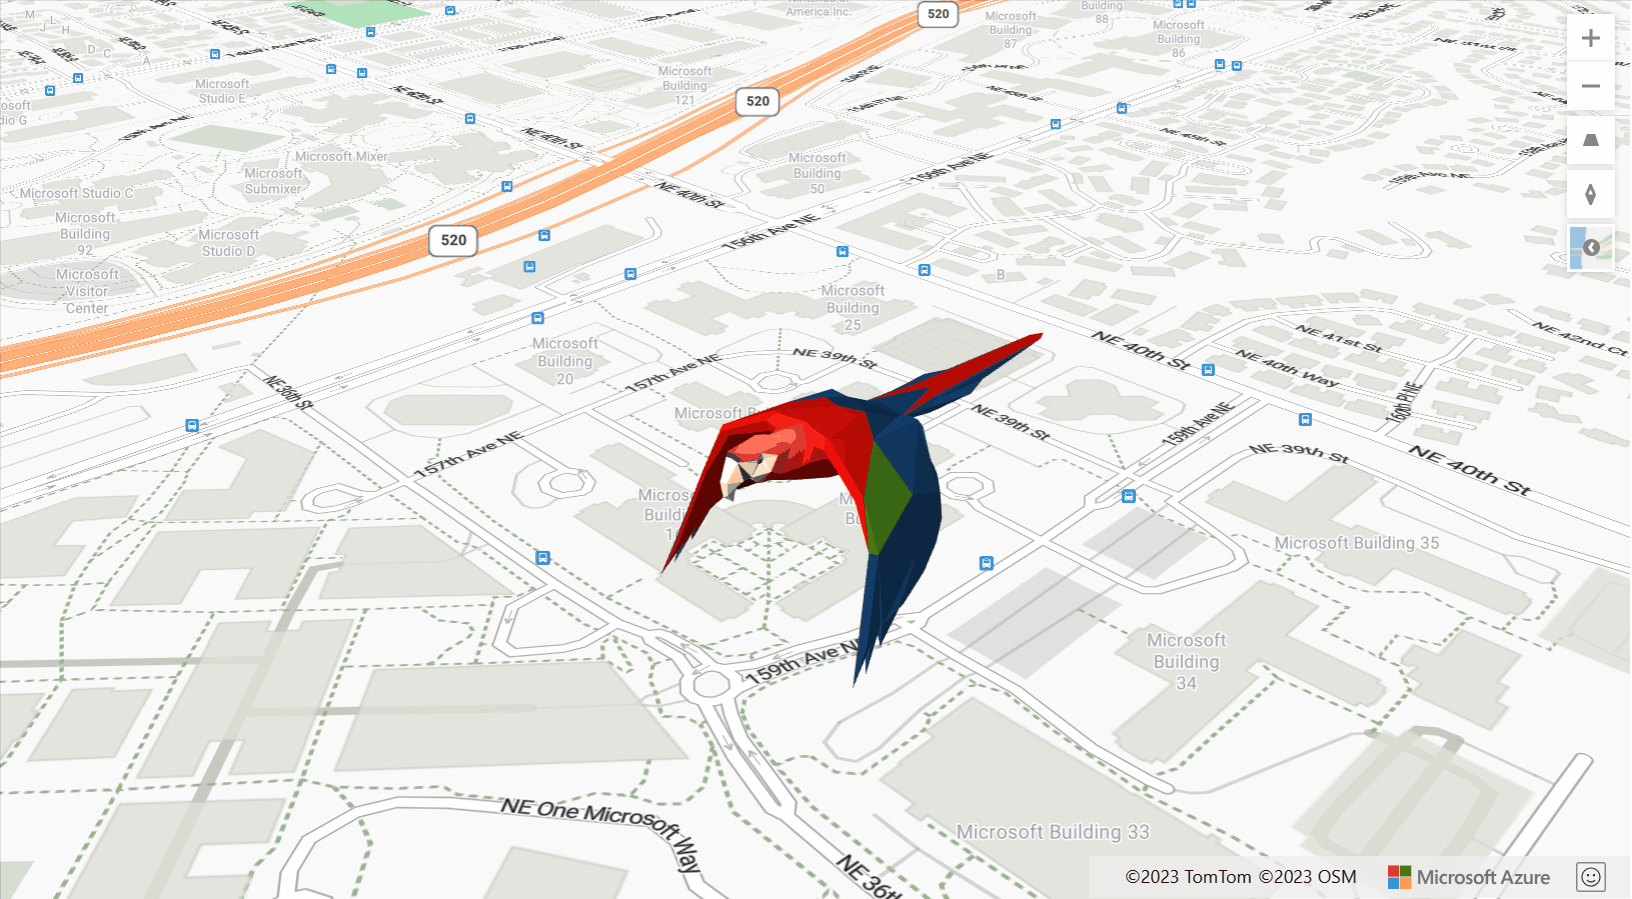 A screenshot showing an animated 3D parrot on the map.